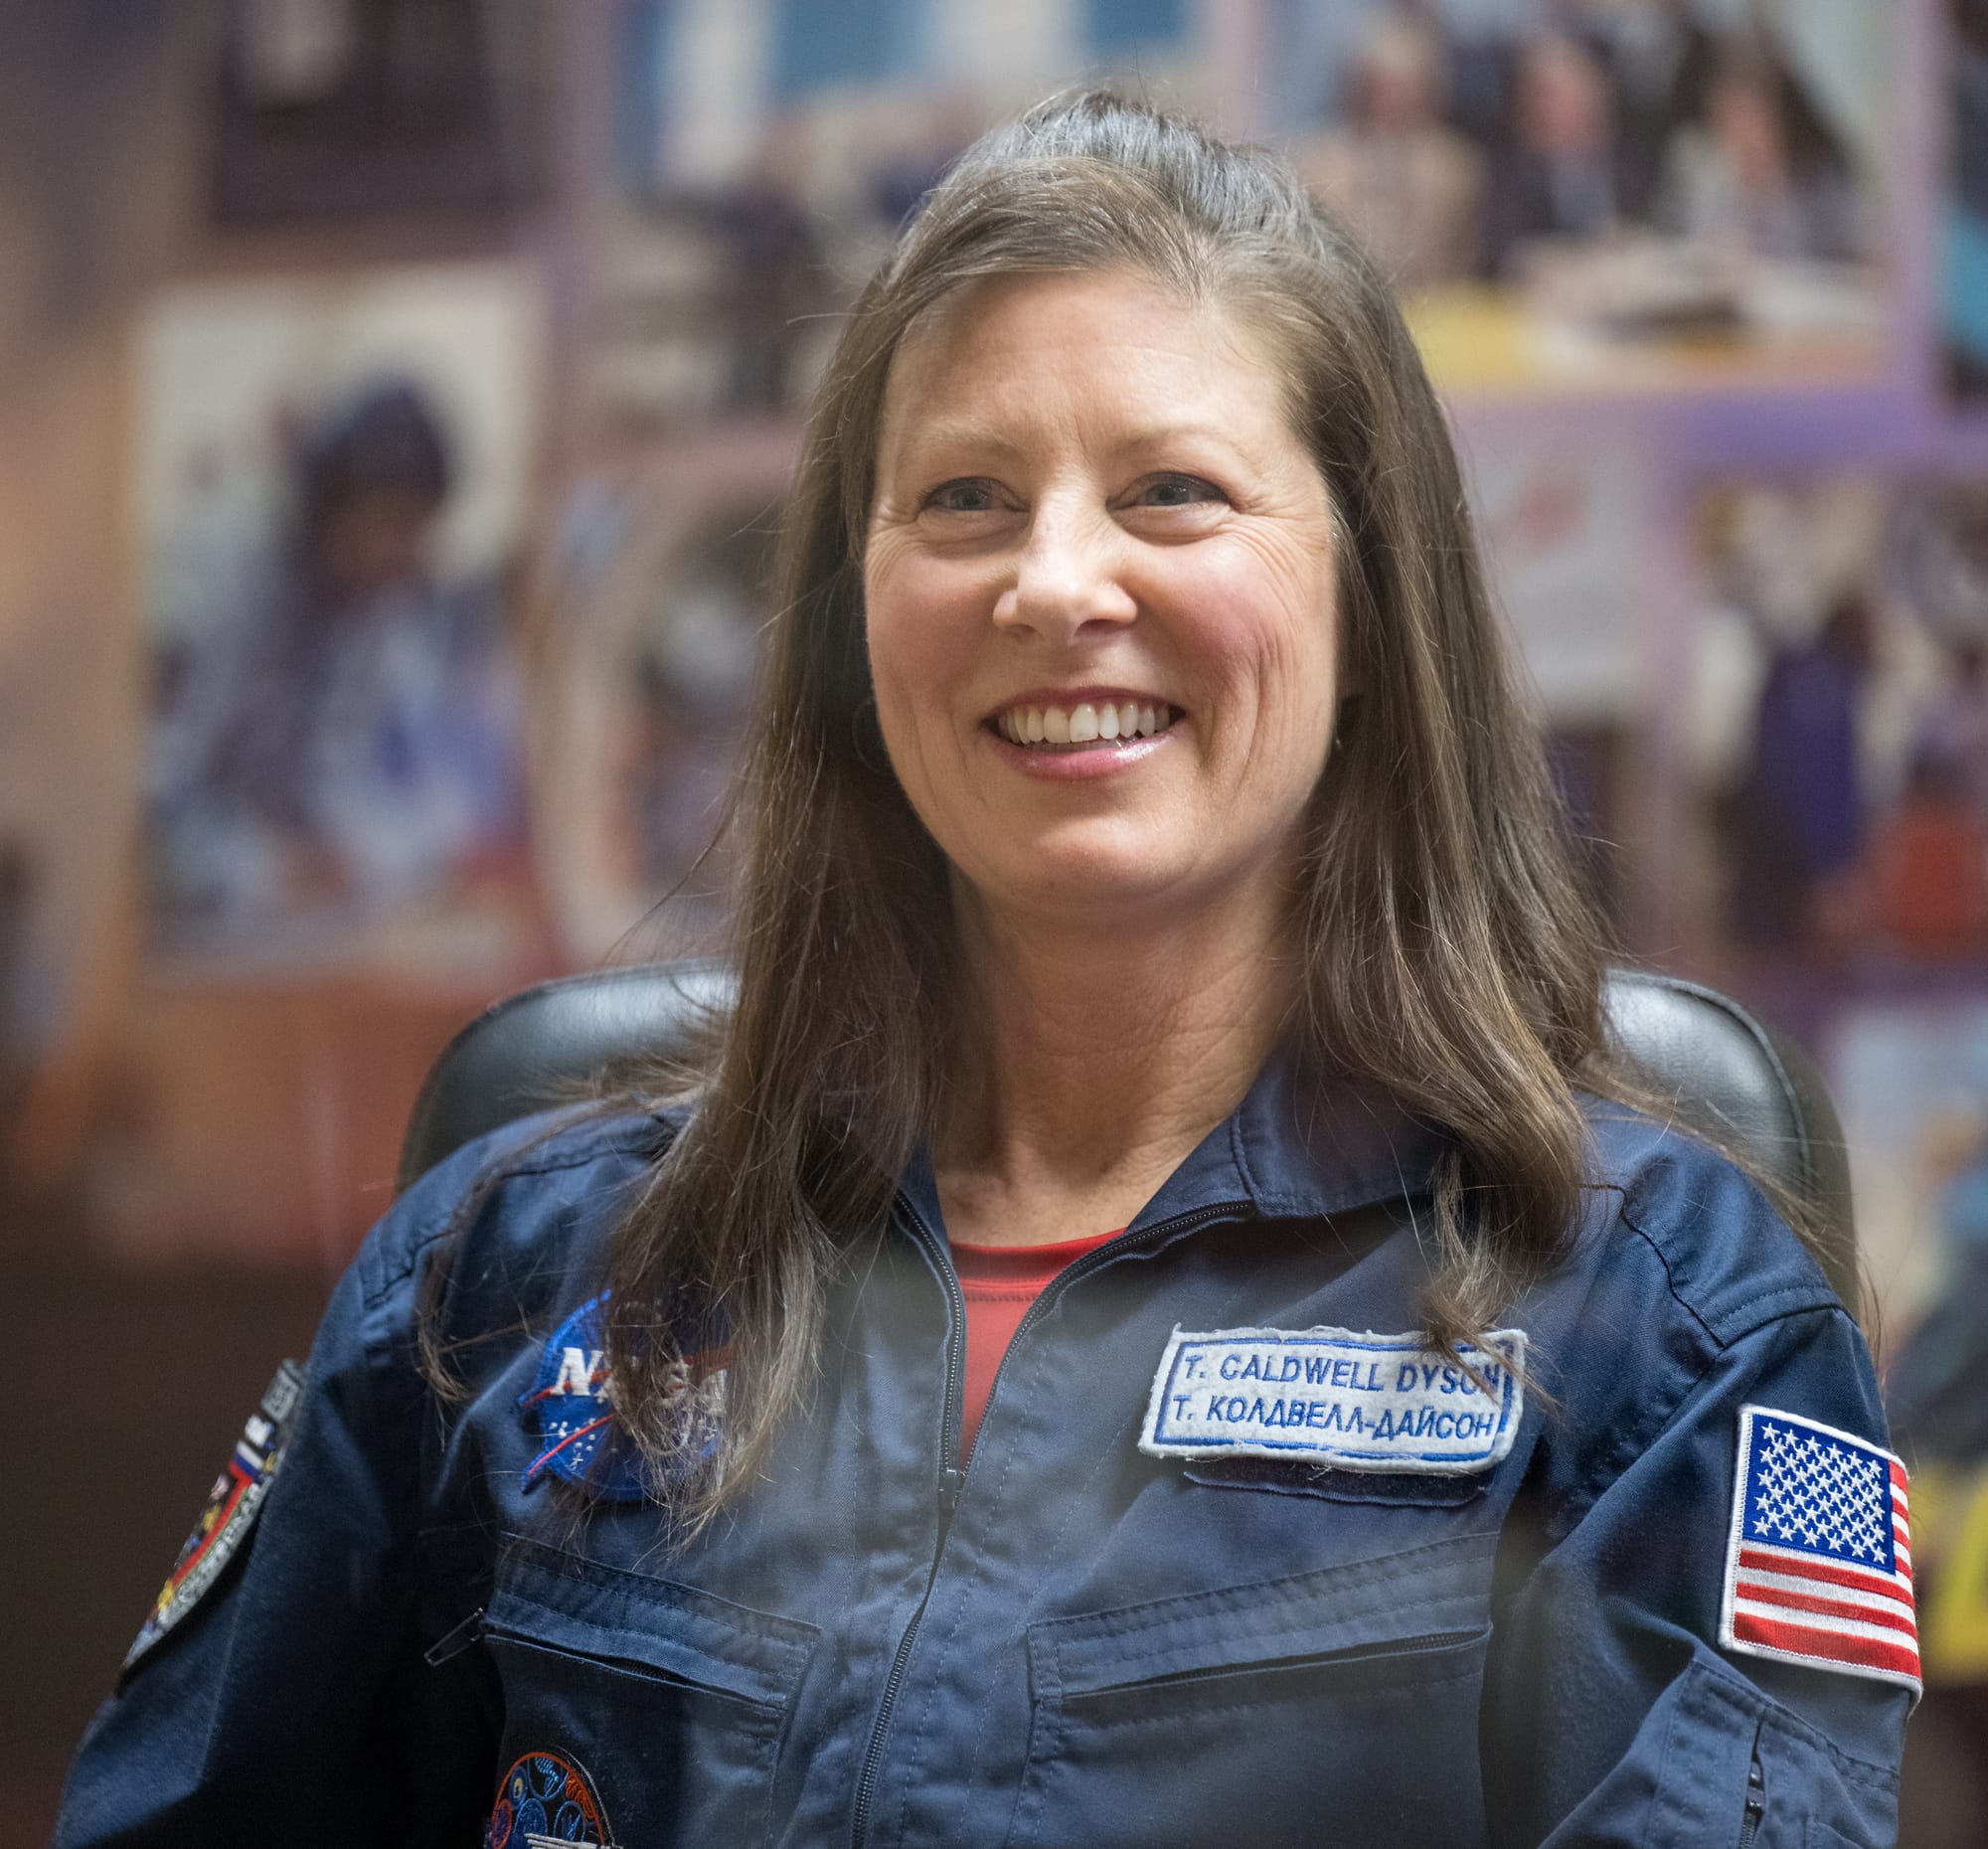 Tracy Caldwell-Dyson during a press conference prior to launch. ©NASA